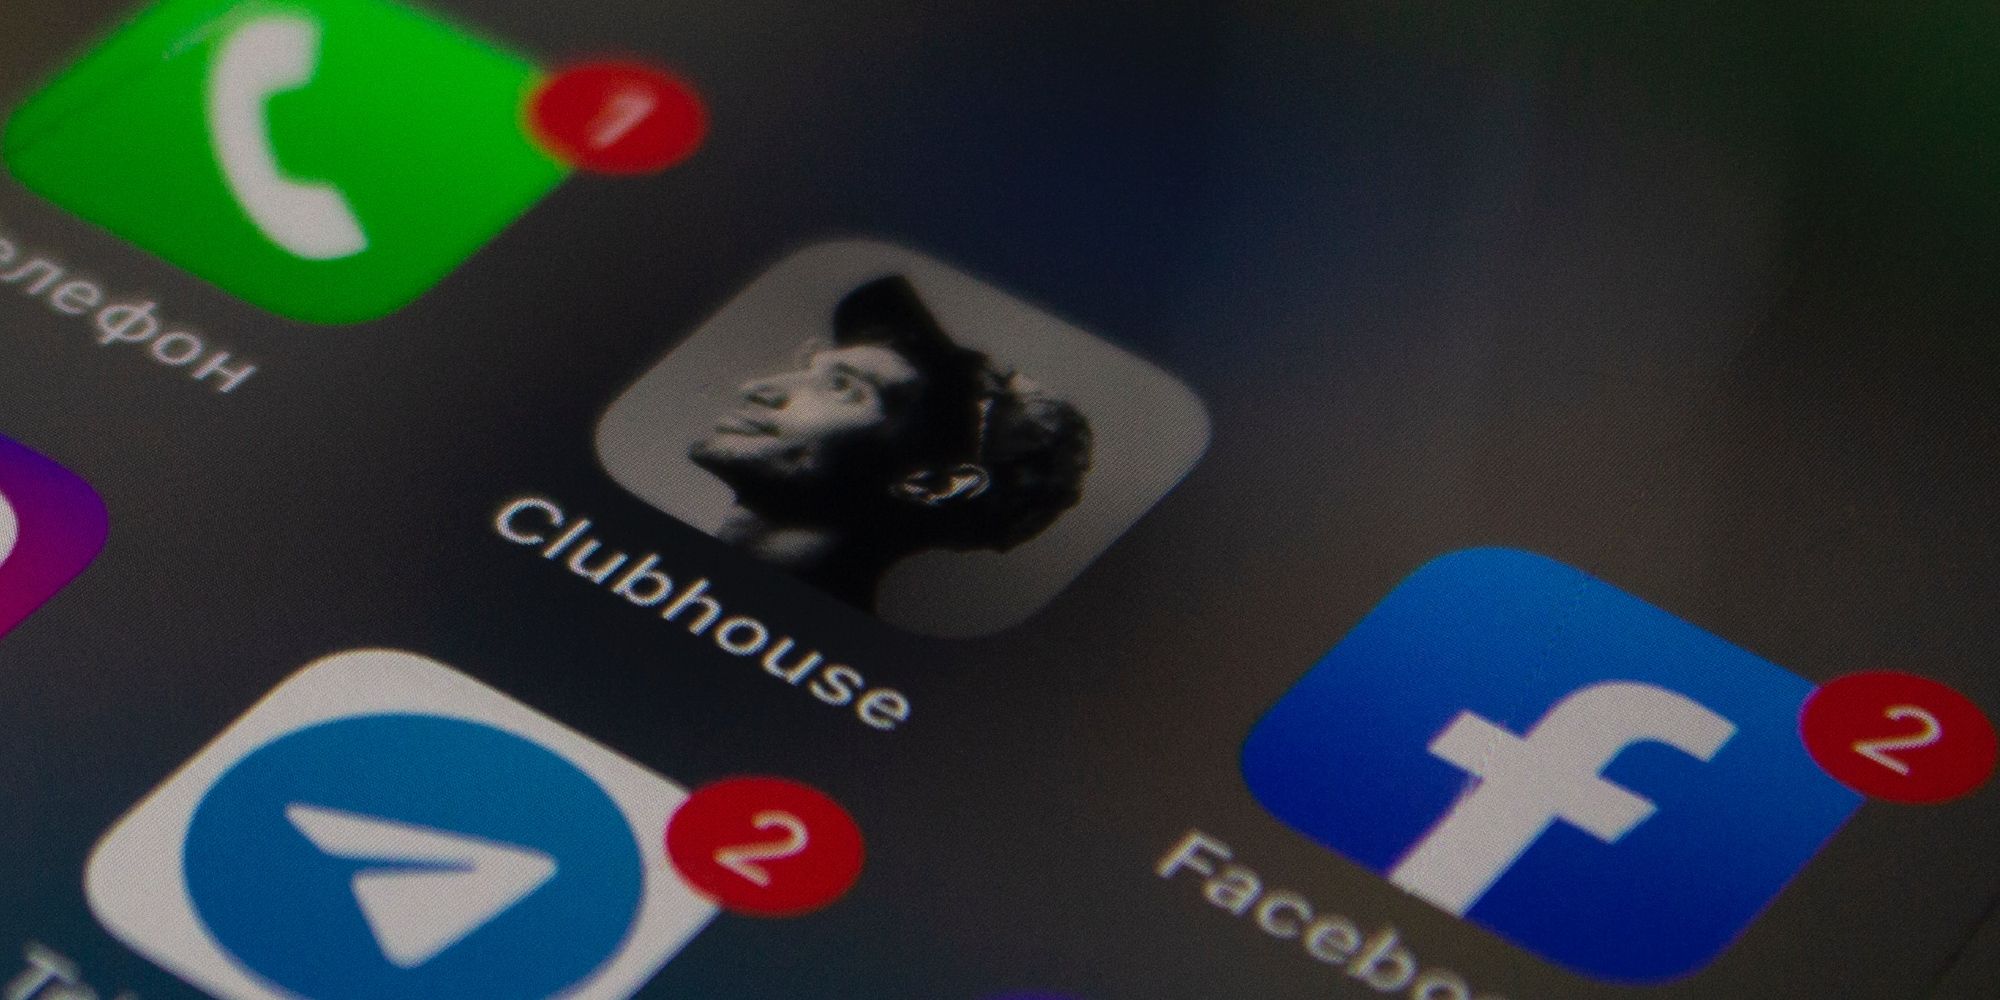 Clubhouse app icon on smartphone display